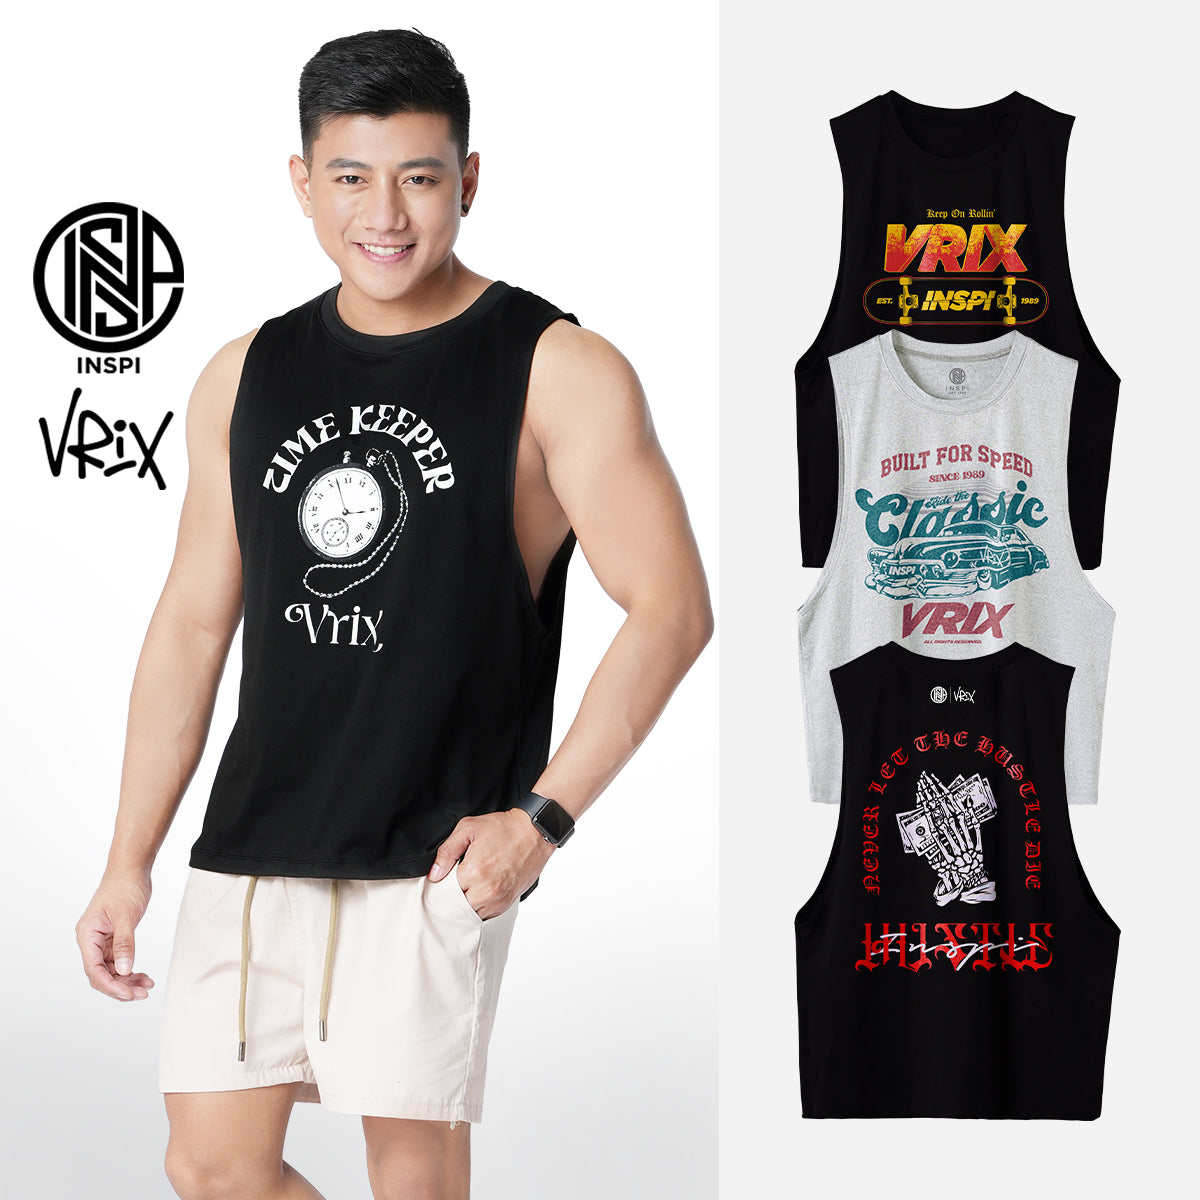 INSPI x Vrix Printed Muscle Tee Activewear Workout Gym Outfit.